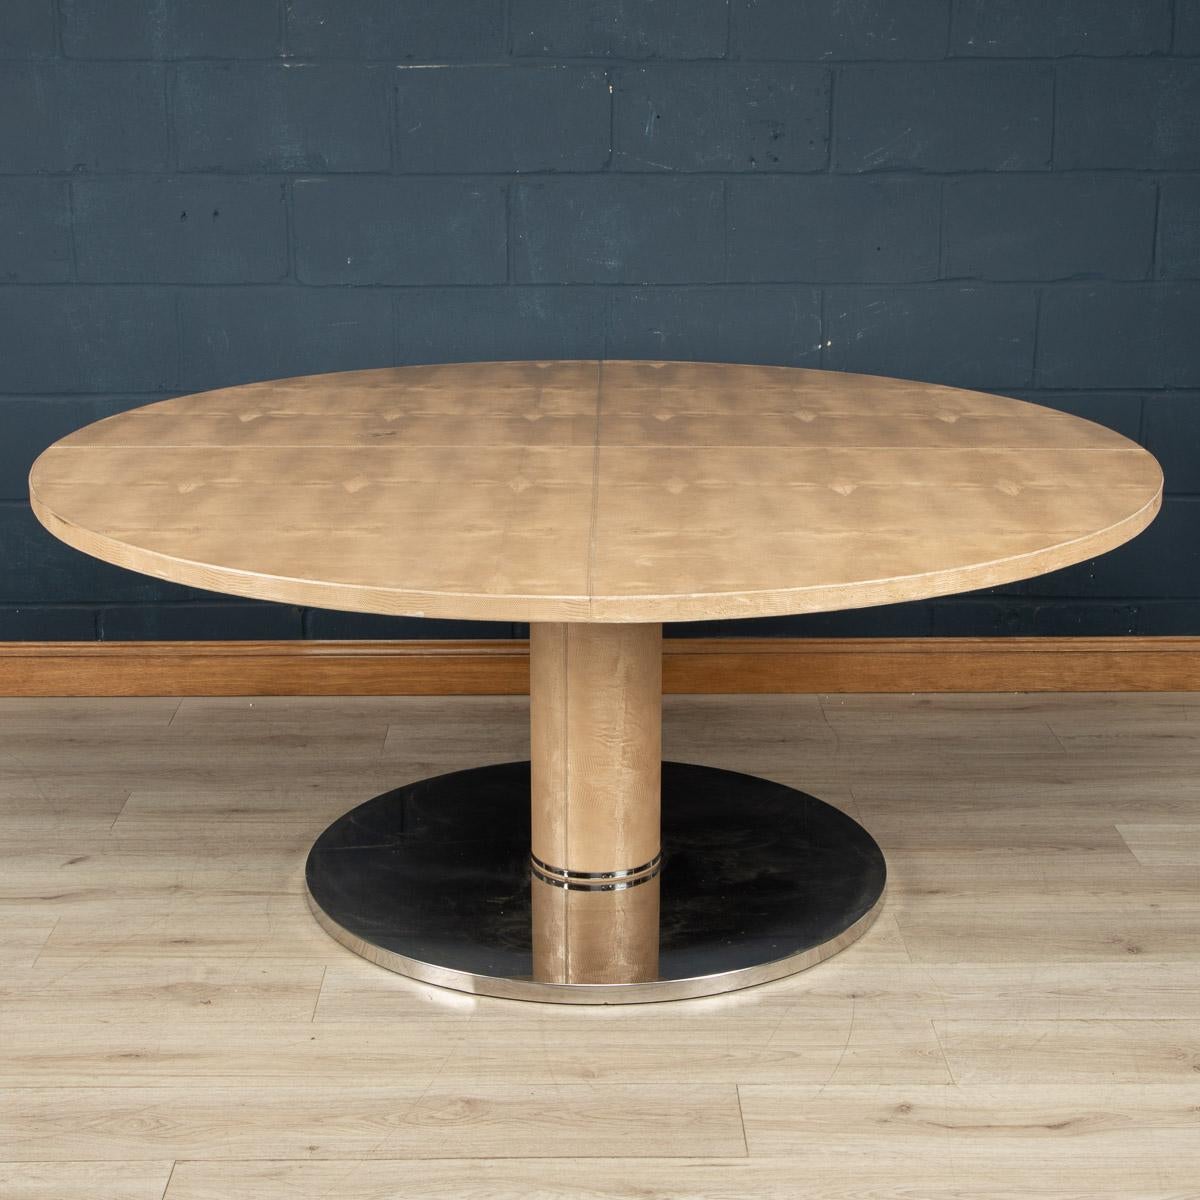 A striking dining table or centre table made in Italy by Fendi. Around the latter part of the 20th century the world renowned maker Fendi joined other famous fashion brands like Hermes and Ralph Lauren in producing home furnishings.

Condition
In